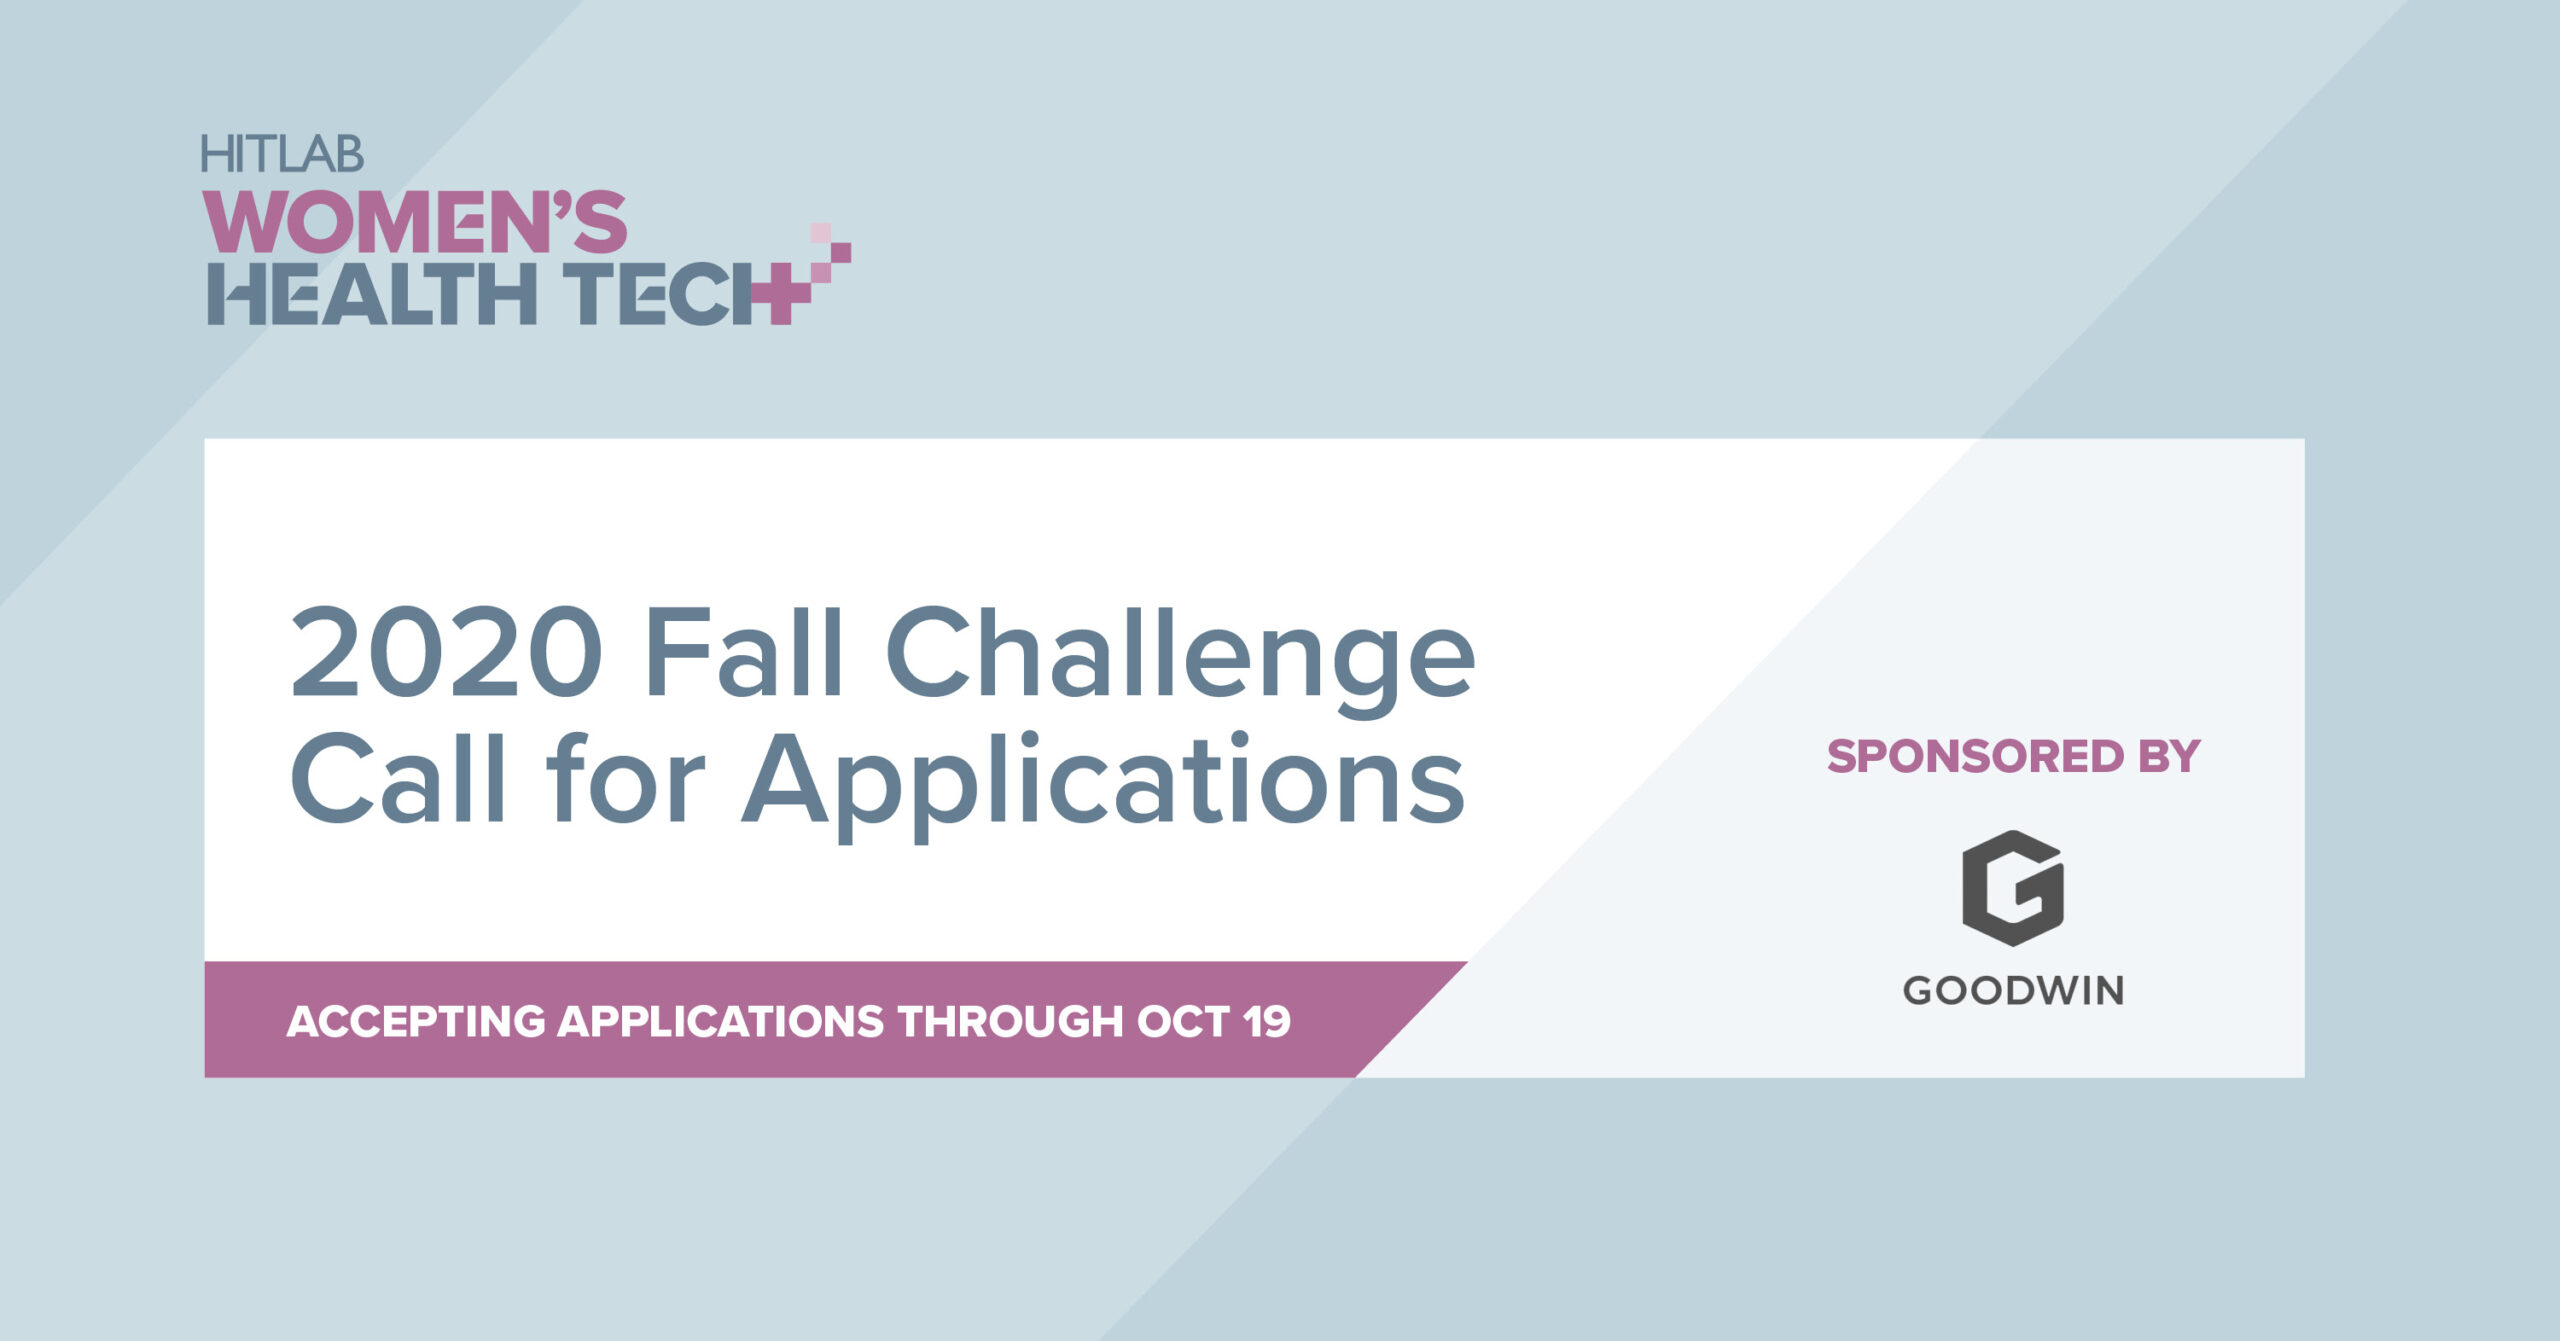 HITLAB Women’s Health Tech 2020 Fall Challenge for Innovators (up to $10,000)